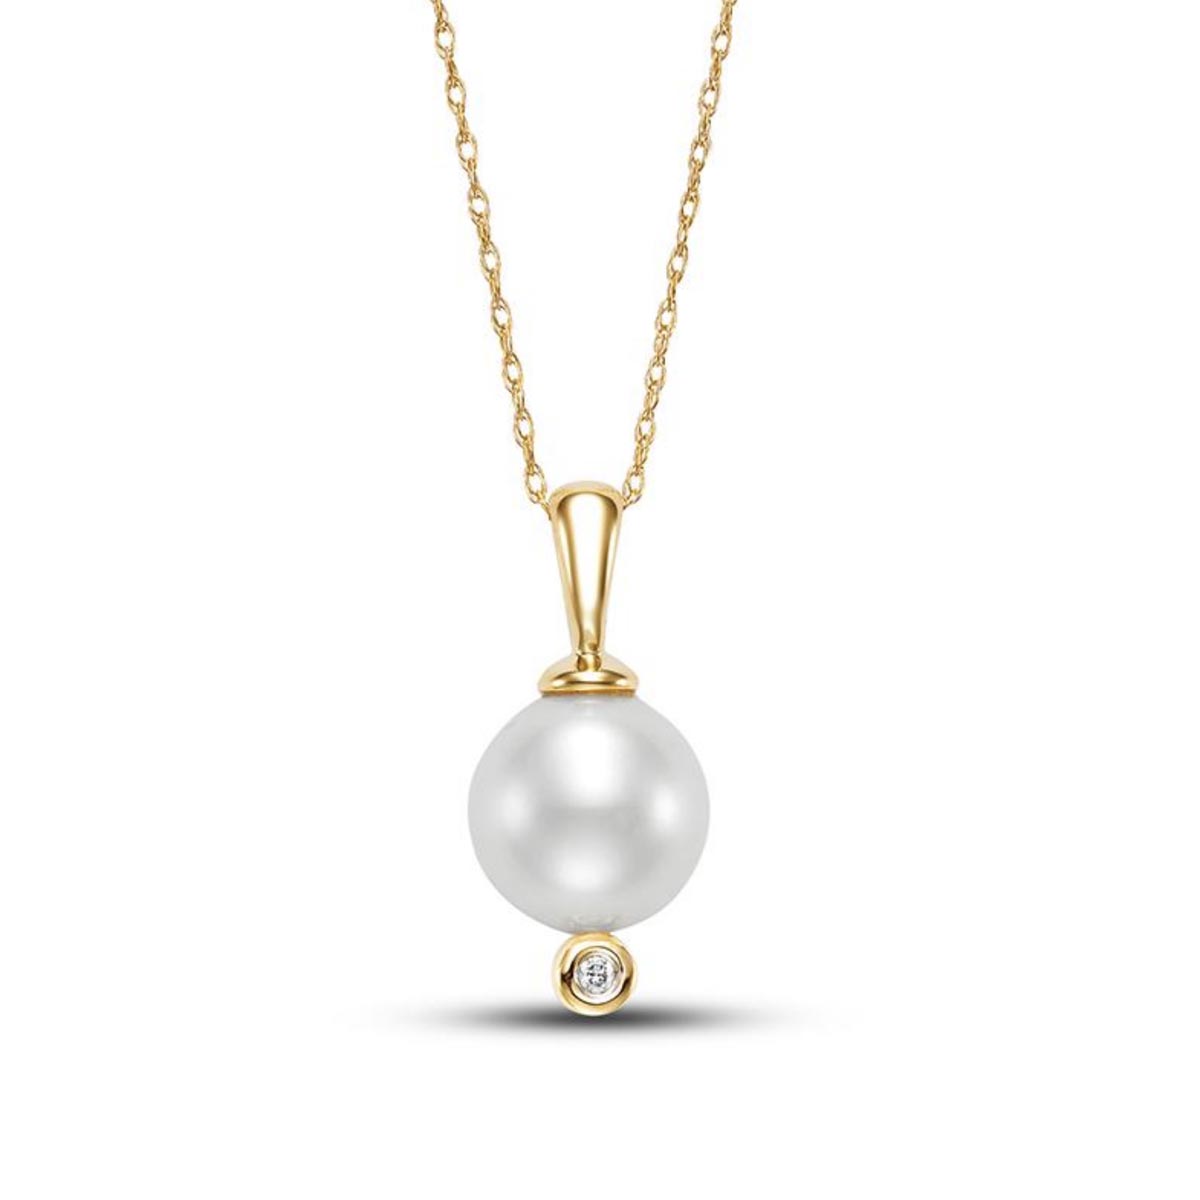 Mastoloni Cultured Freshwater Pearl Necklace in 14kt Yellow Gold with Diamond (8.5-9mm pearl and .01ct)